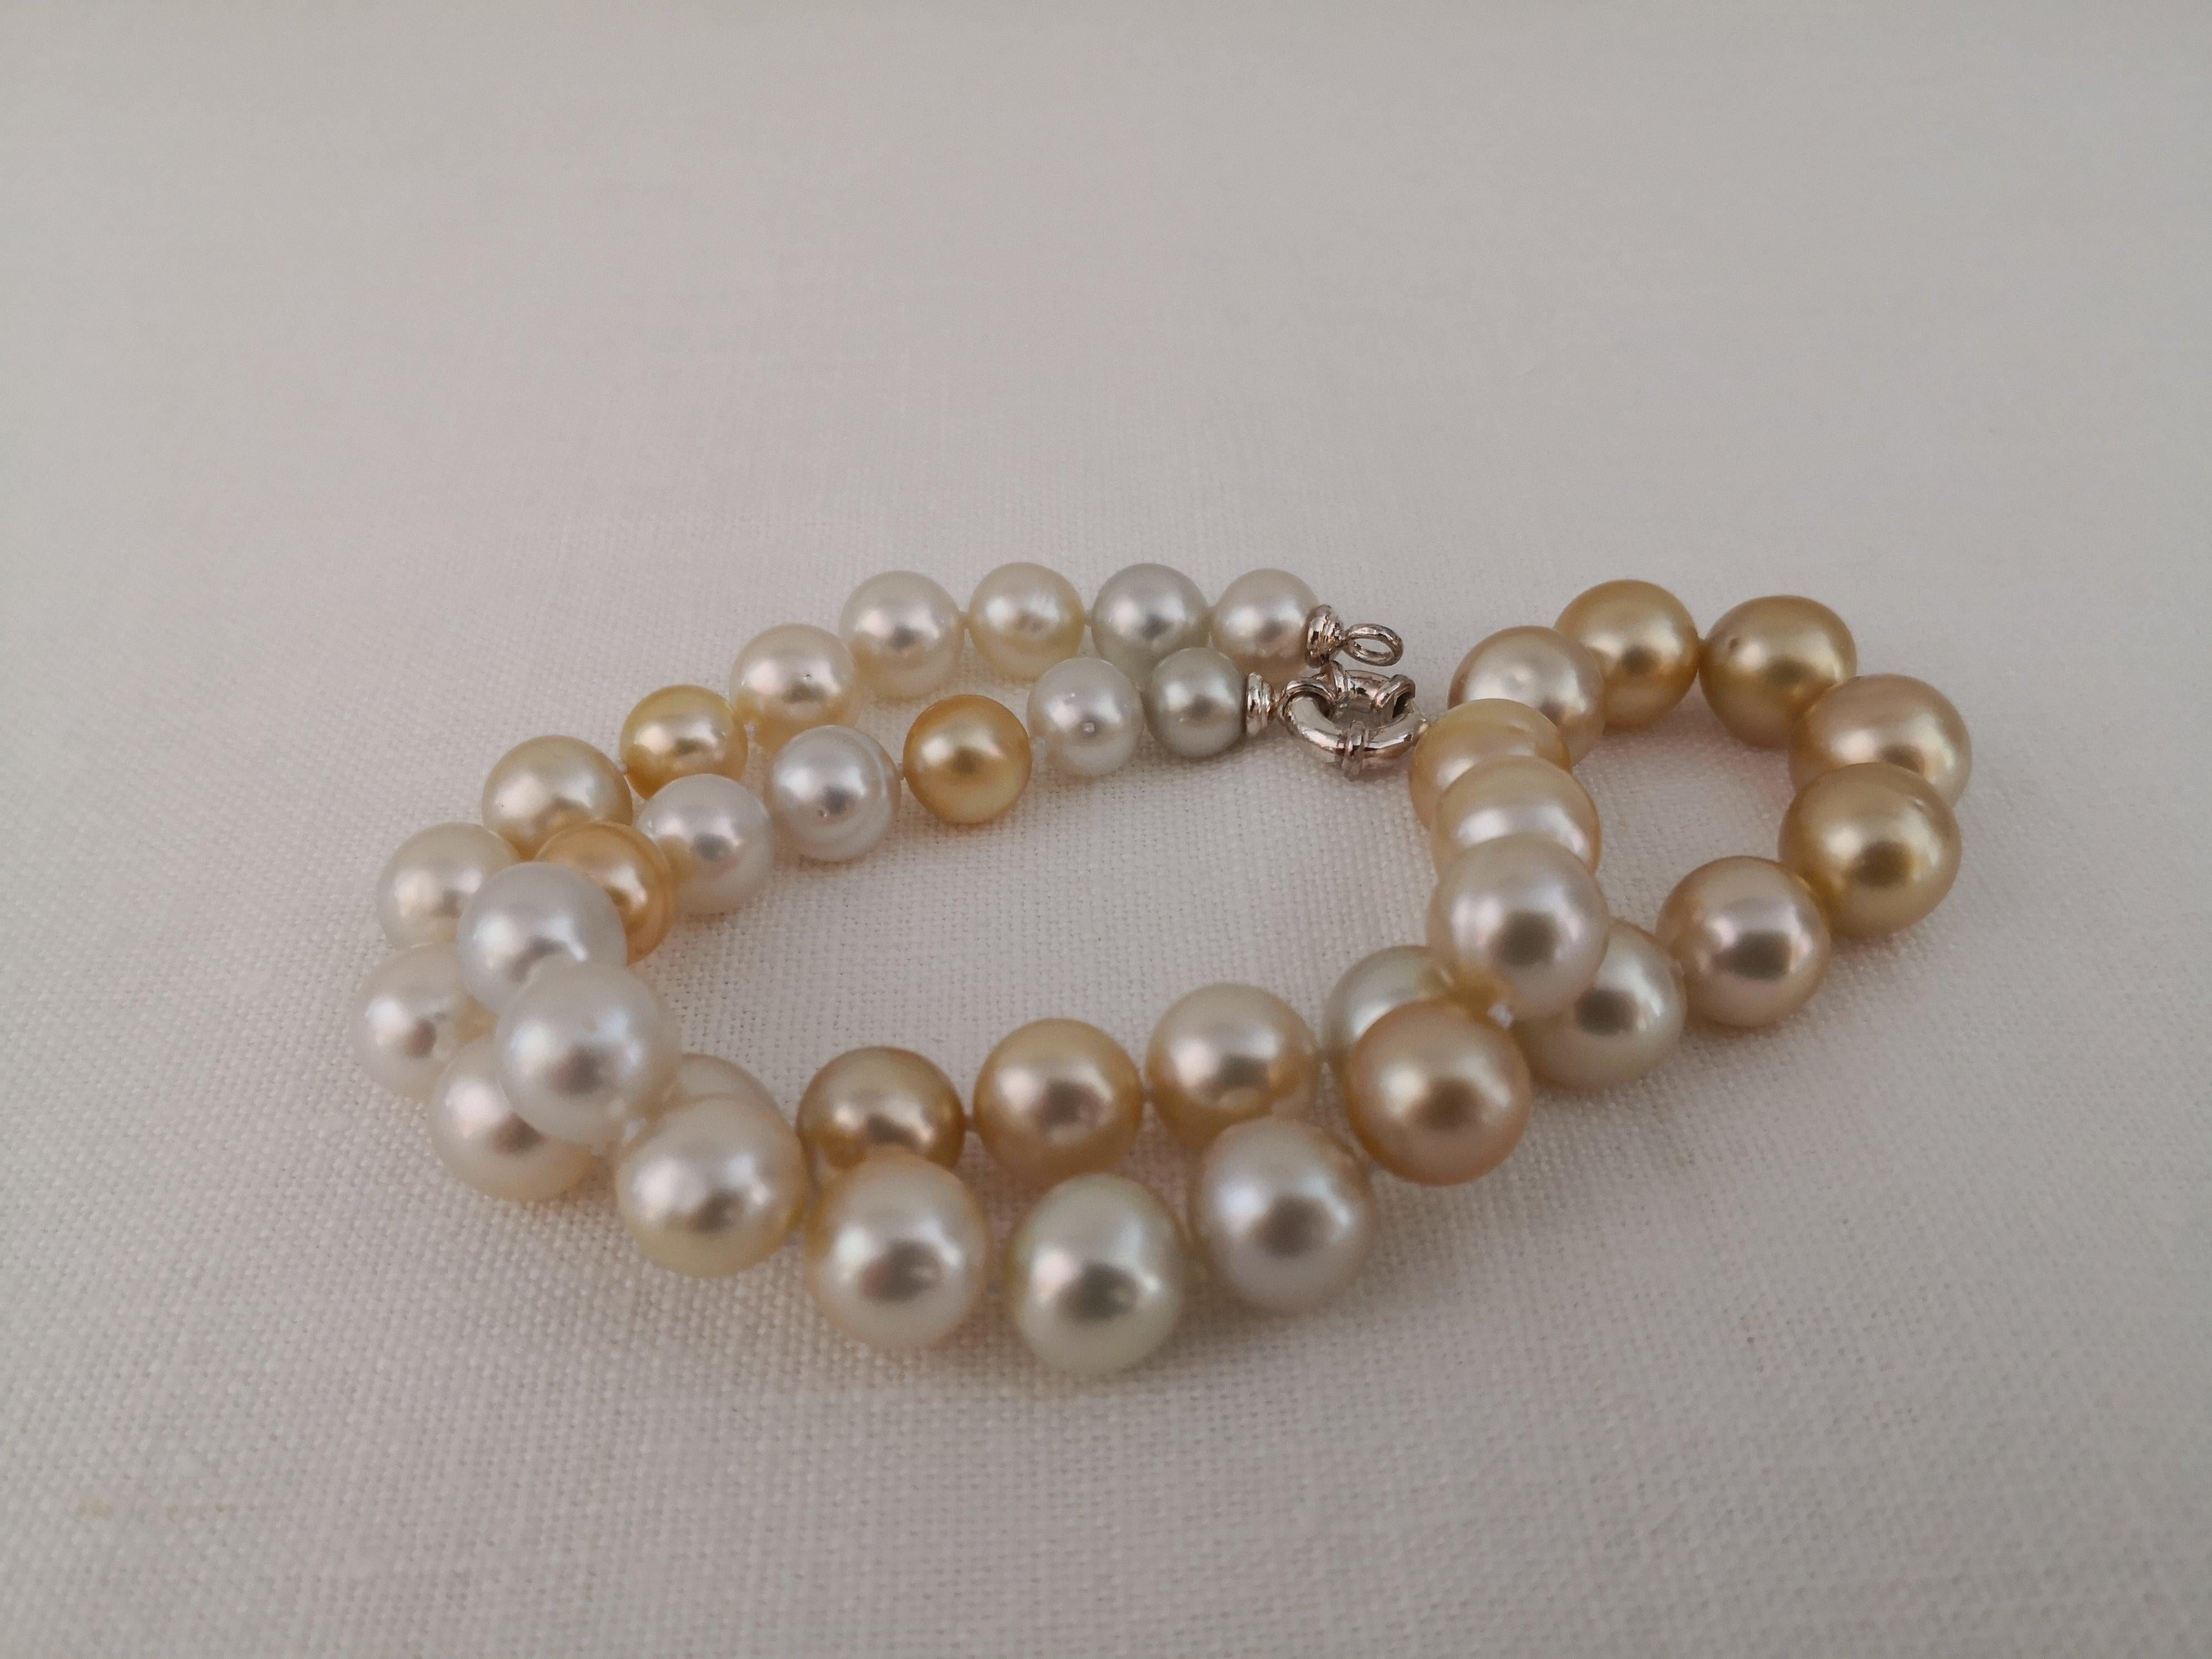 A Natural Color South Sea Pearls necklace

- Size of Pearls 10-13 mm of diameter

- Pearls from Pinctada Maxima Oyster

- Origin: Indonesia ocean waters

- Natural Color pearls 

- Natural luster and orient

- Pearls of Round shape

- Number of